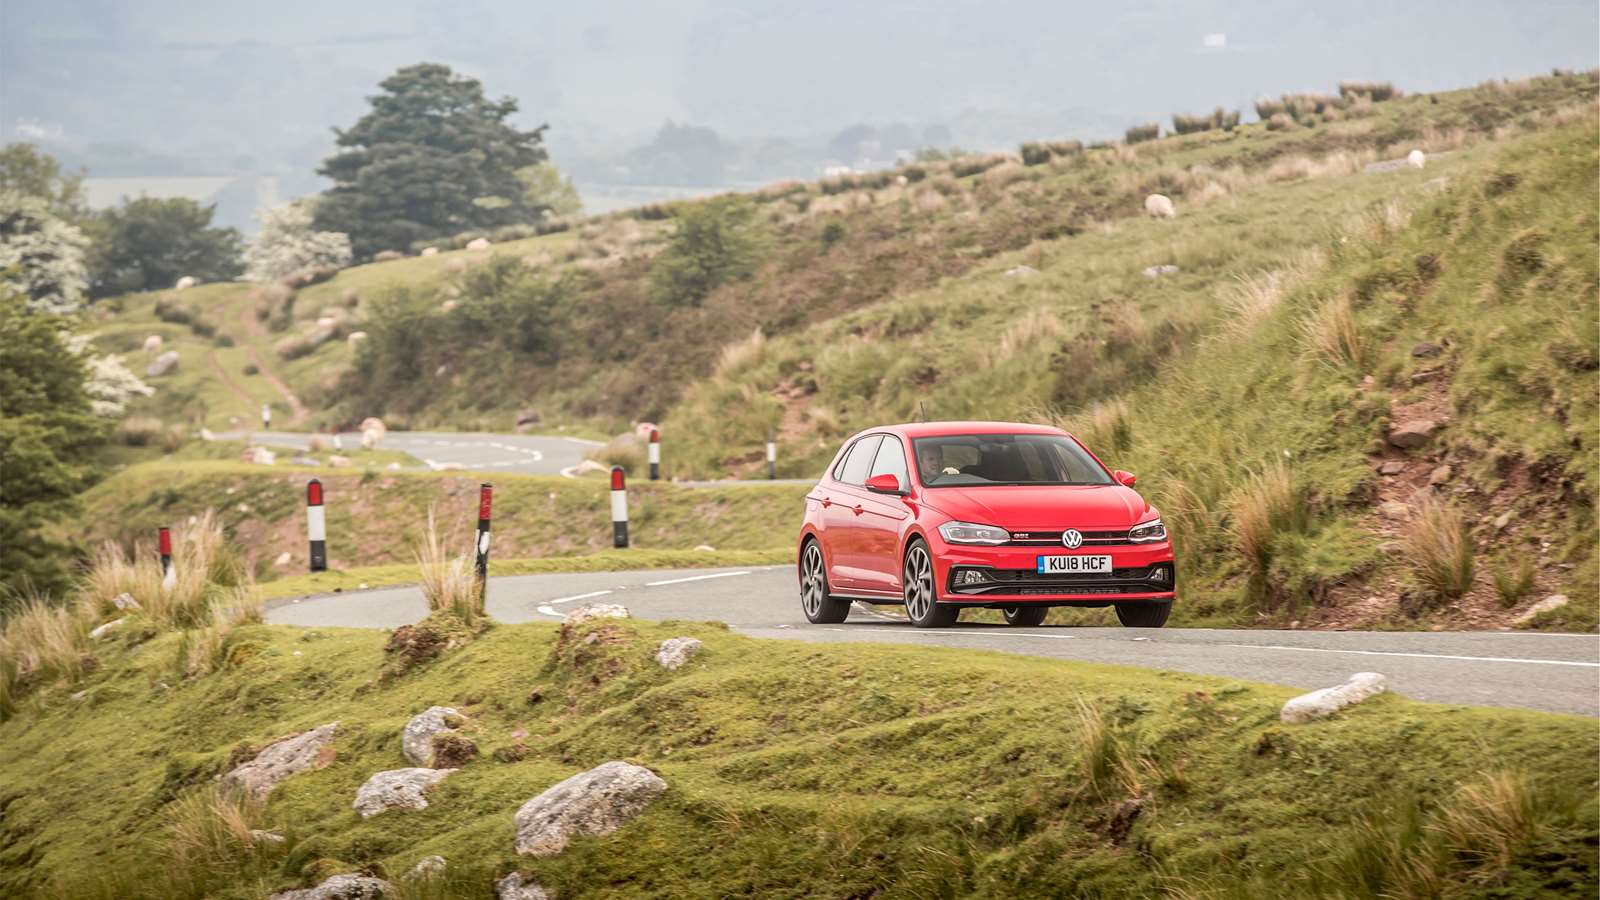 https://www.goodwood.com/globalassets/.road--racing/road/news/2020/3-march/review-vw-polo-gti/volkswagen-polo-gti-review-goodwood-17032020.jpg?crop=(0,216,2600,1679)&width=1600